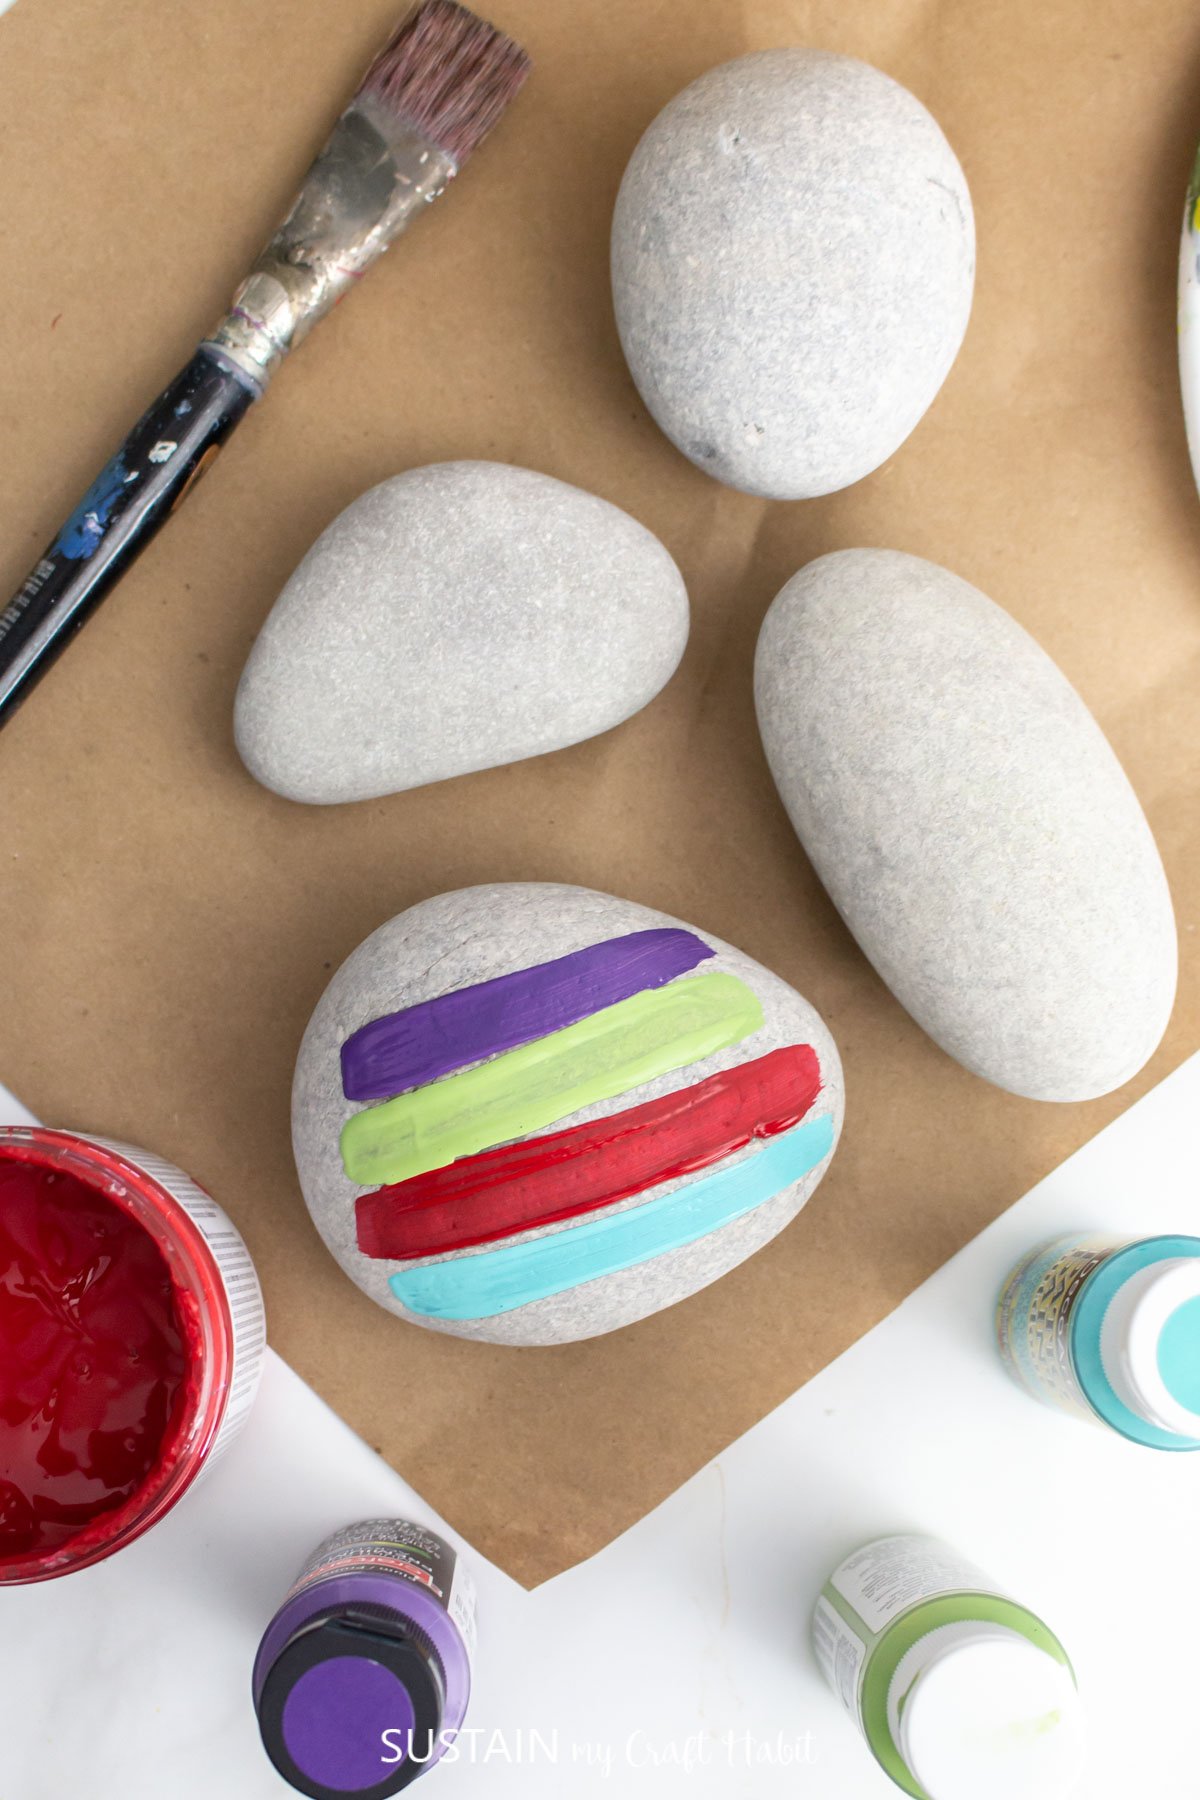 Three oval stones on a brown craft paper surface. One rock is painted with four different types of paint.